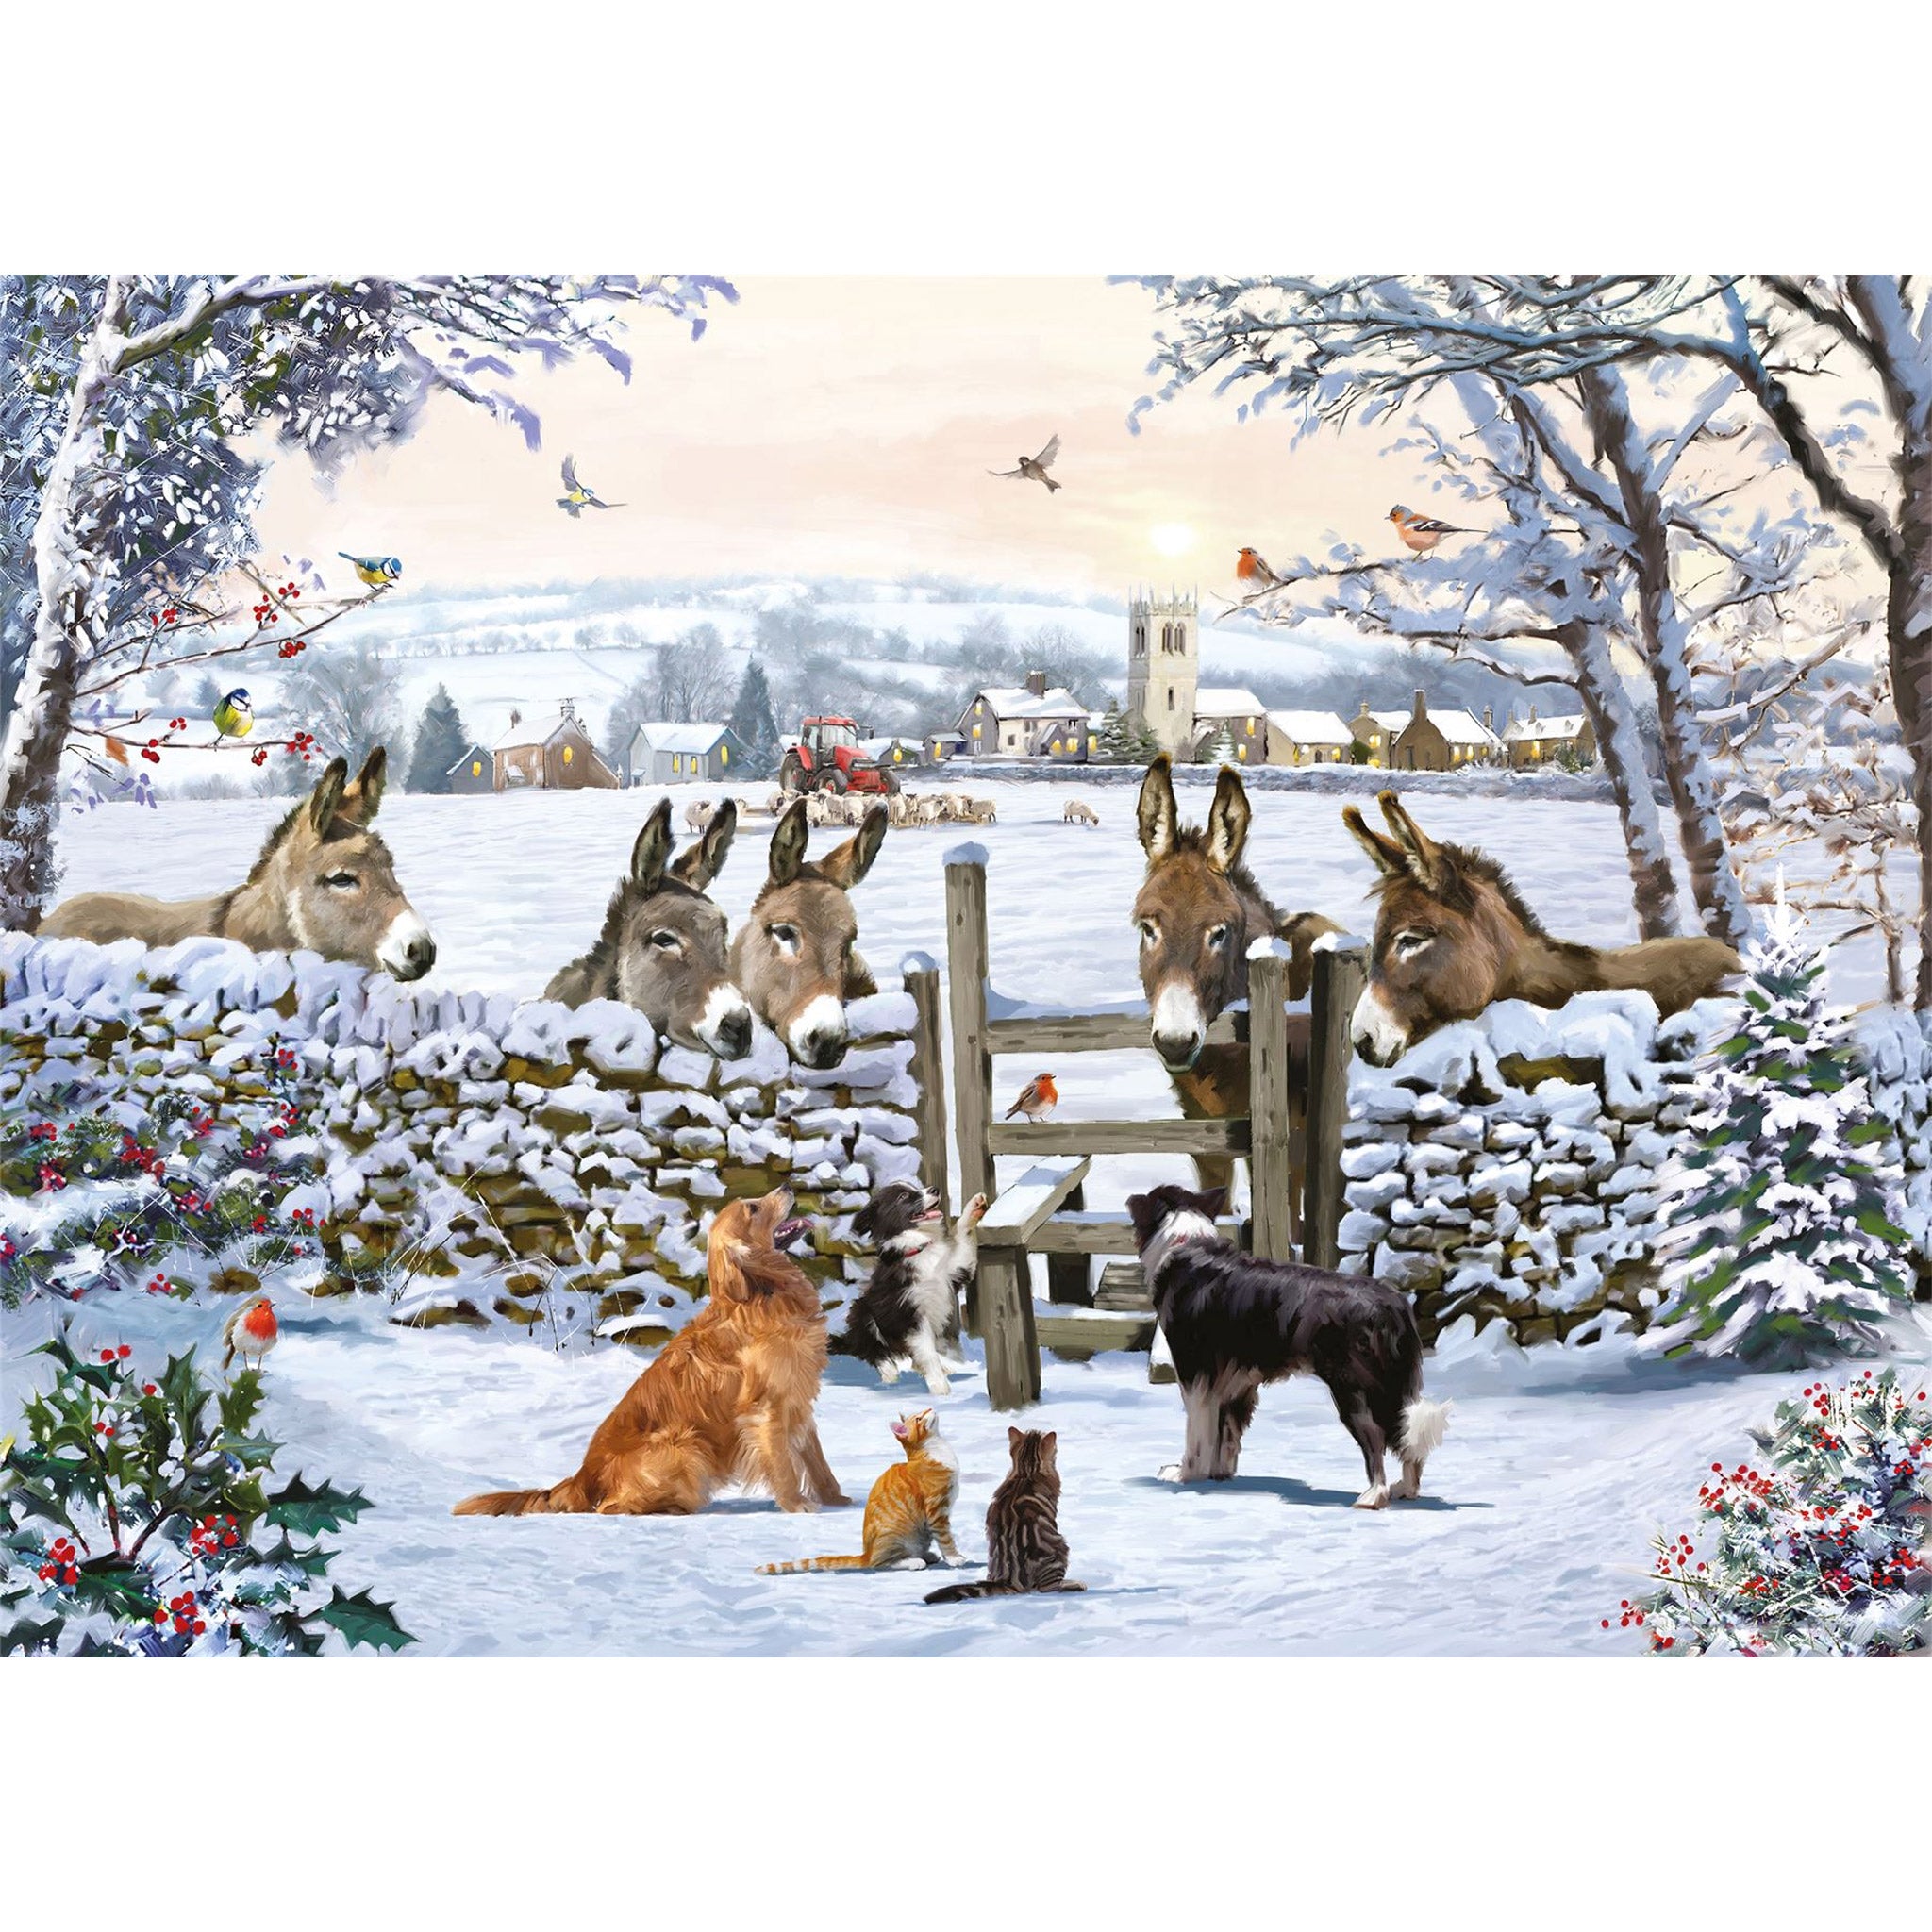 An image of the design on the jigsaw showing a snowy scene with three dogs and two cats in a field, and five donkeys are looking over a wall at them. A robin is sitting on a snow coated stile.